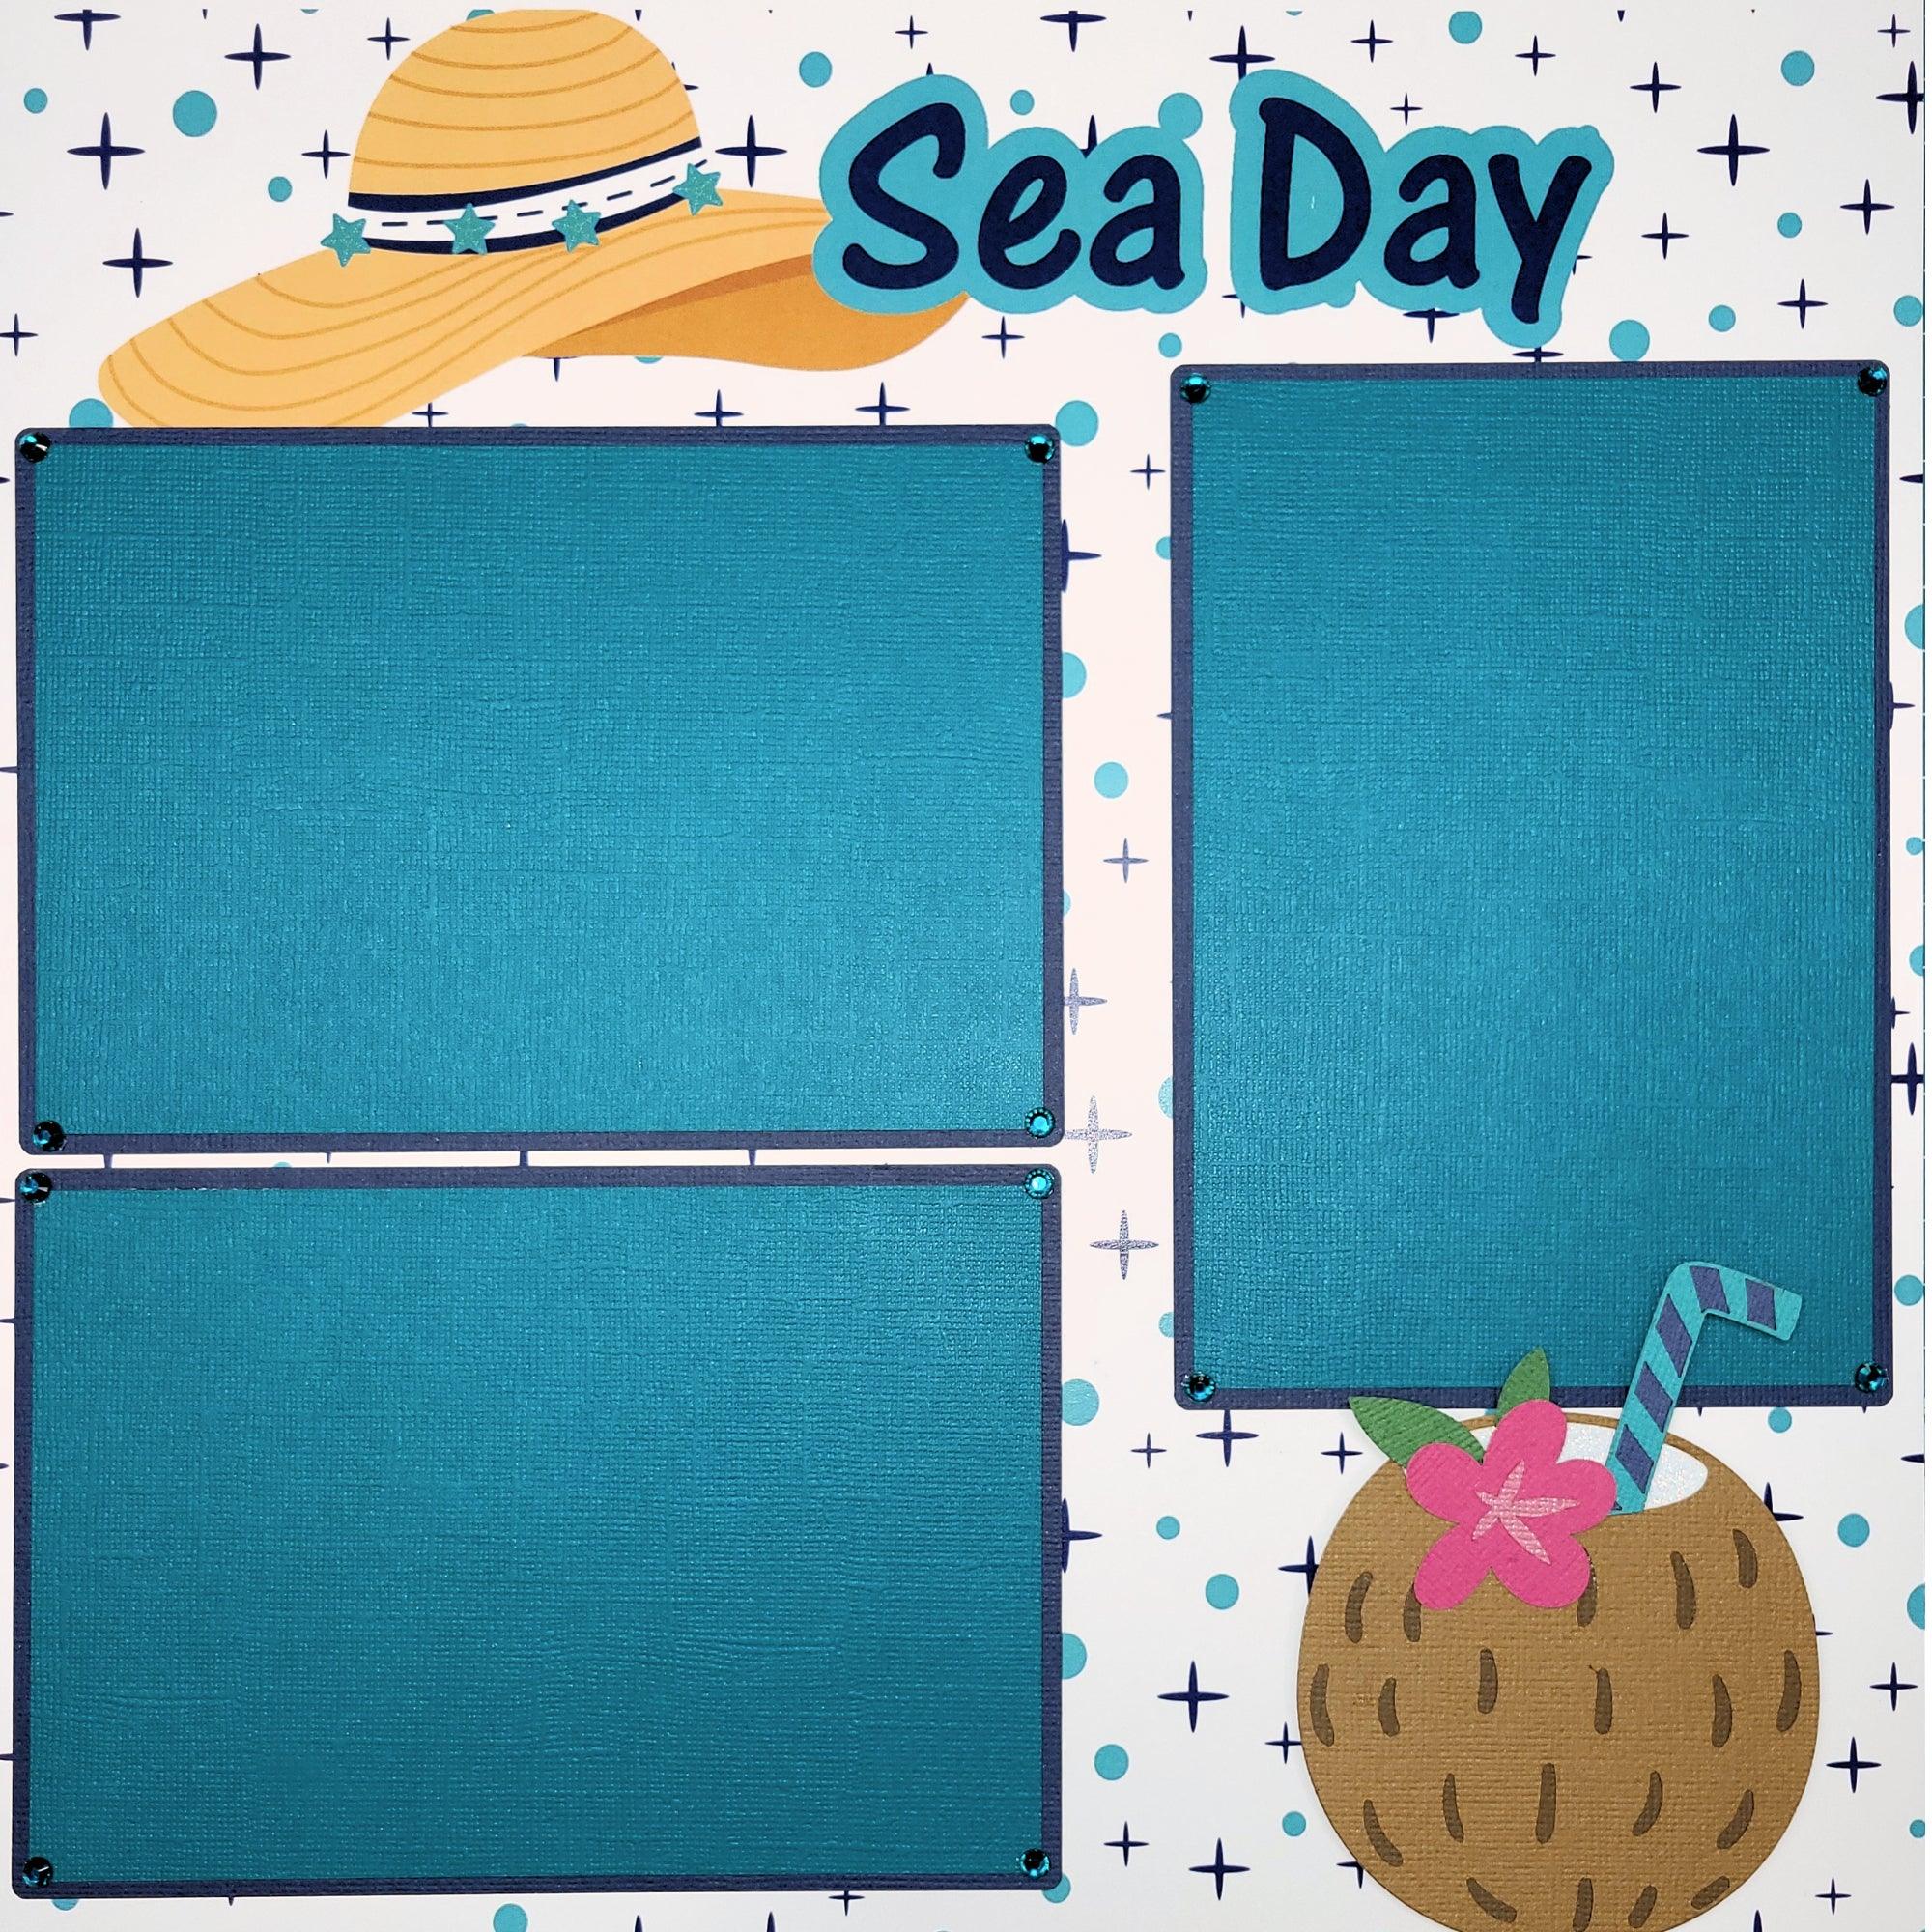 Cruise Collection 2 - 12 x 12 Pages, Fully-Assembled & Hand-Embellished 3D Scrapbook Premade by SSC Designs - Scrapbook Supply Companies